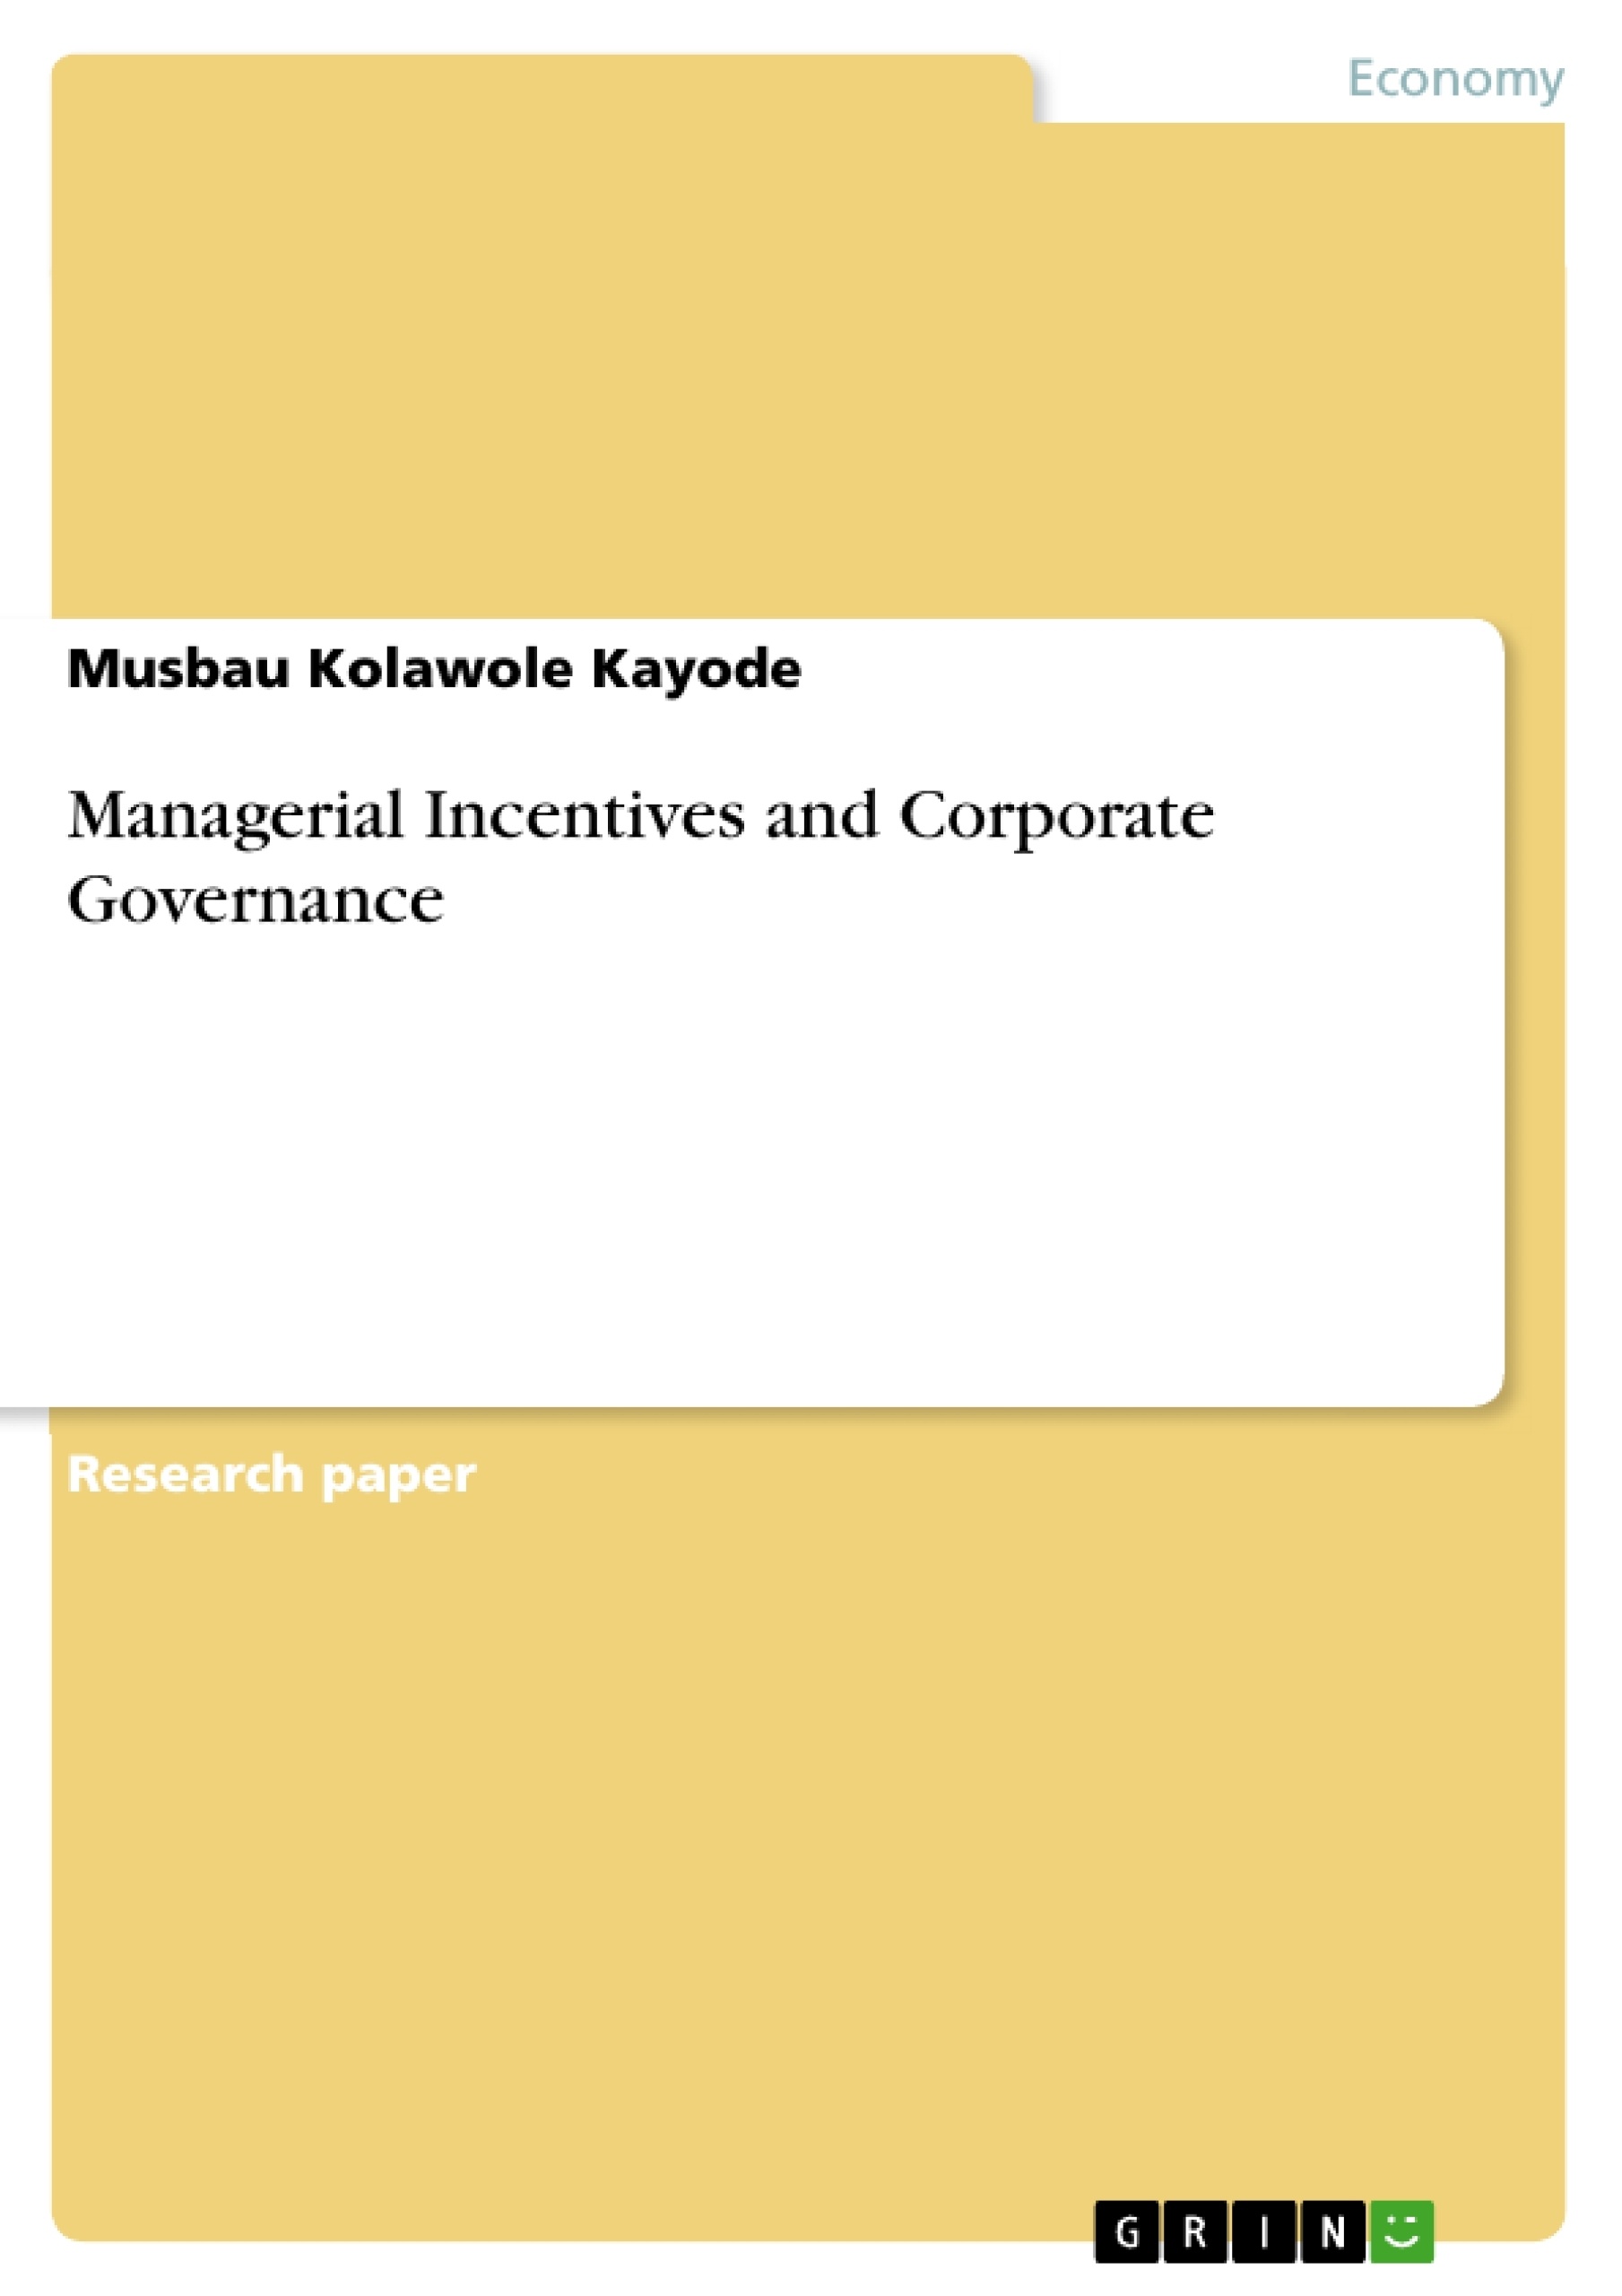 Title: Managerial Incentives and Corporate Governance